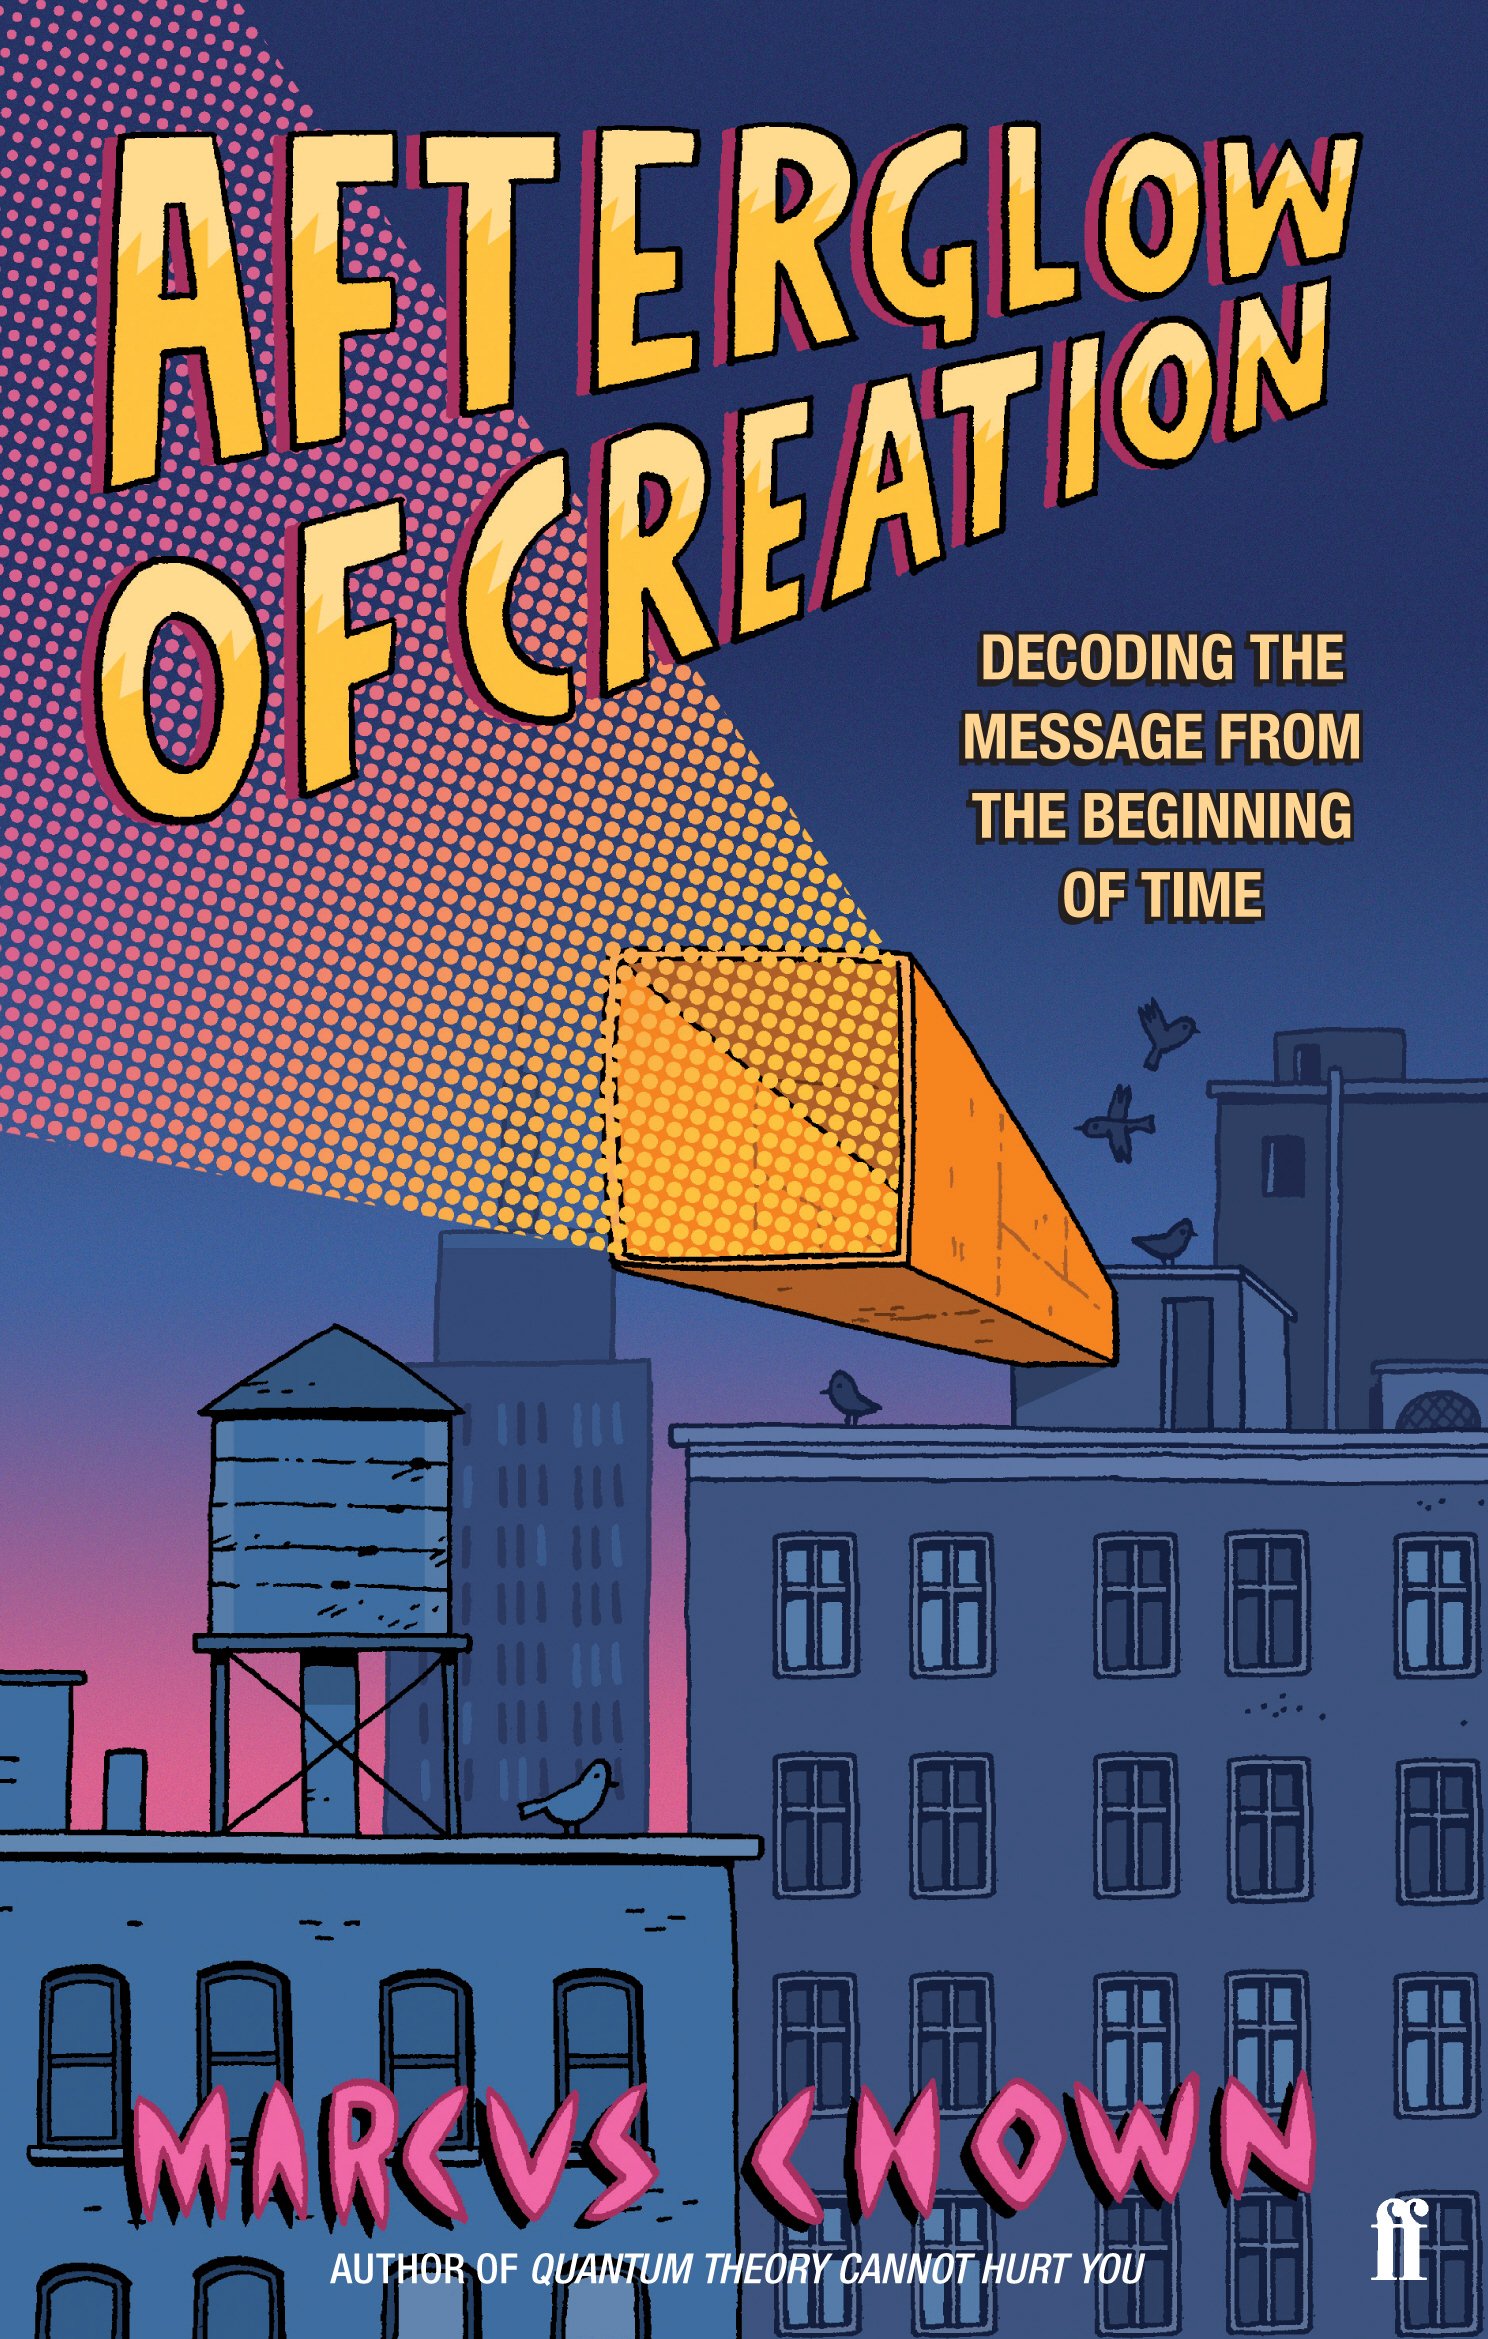 Afterglow of Creation: Decoding the message from the beginning of time - Marcus Chown